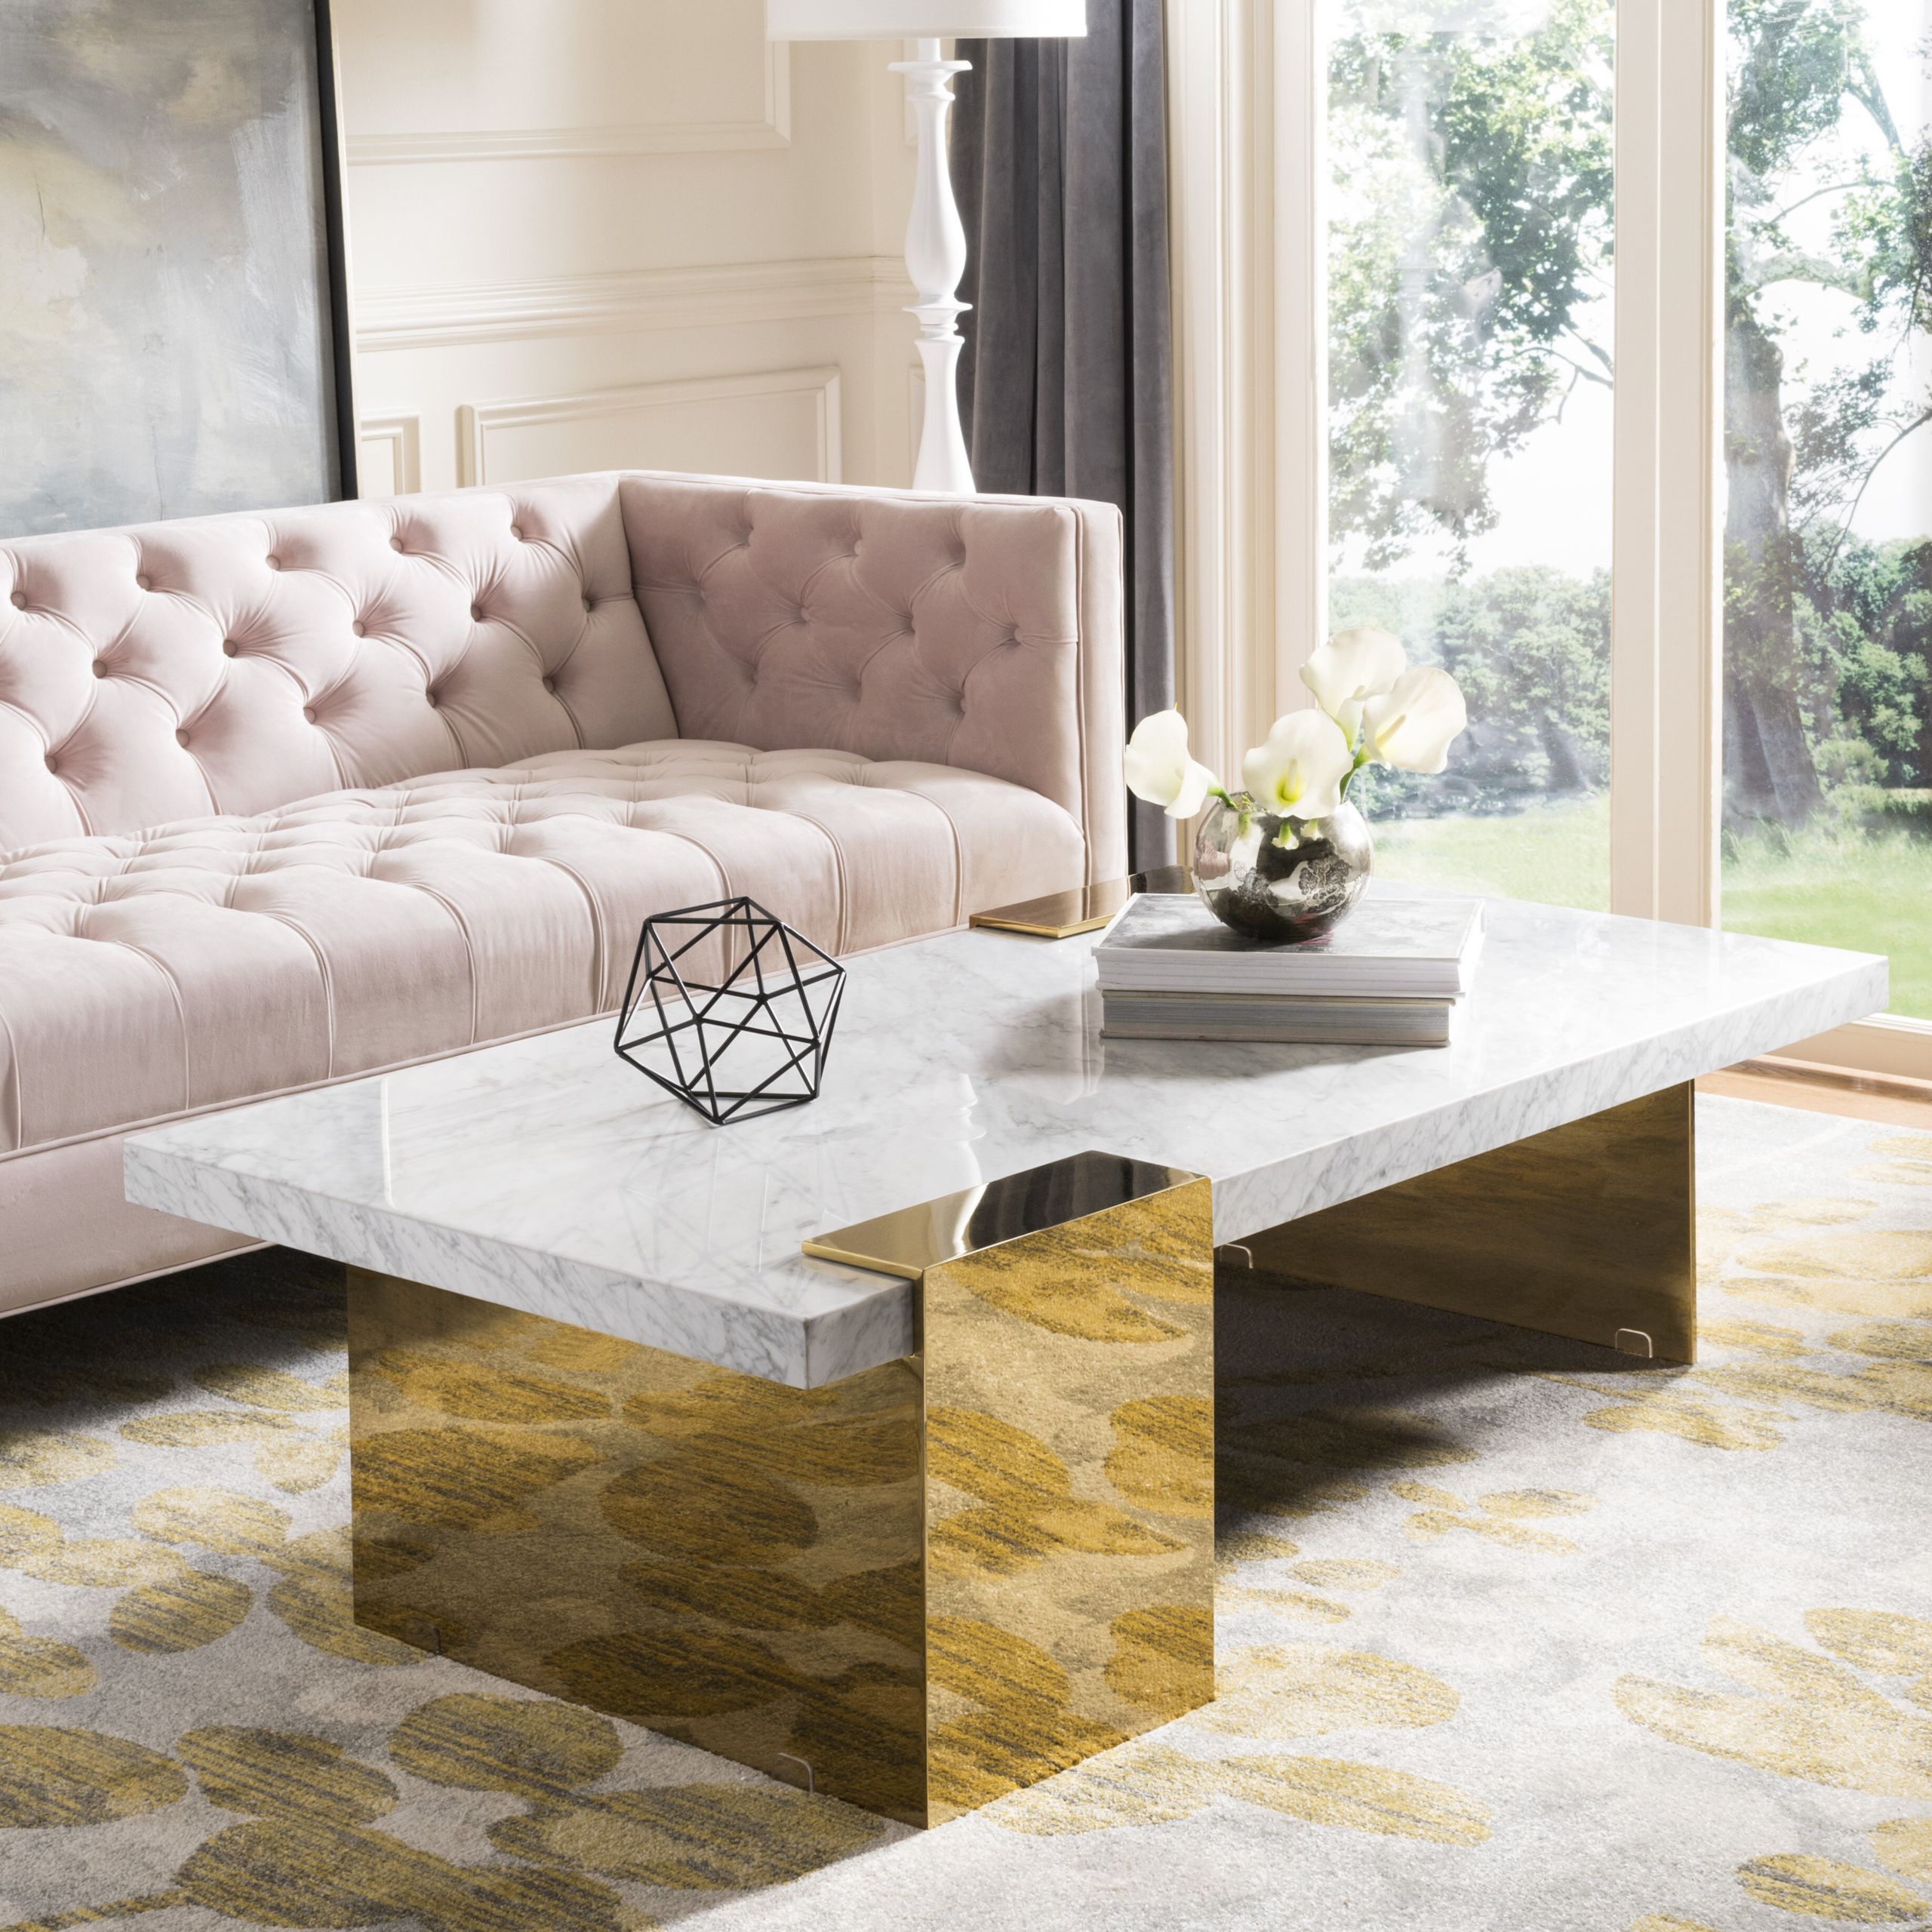 Faux White Marble Coffee Table – Visualhunt Regarding White Faux Marble Coffee Tables (View 7 of 15)